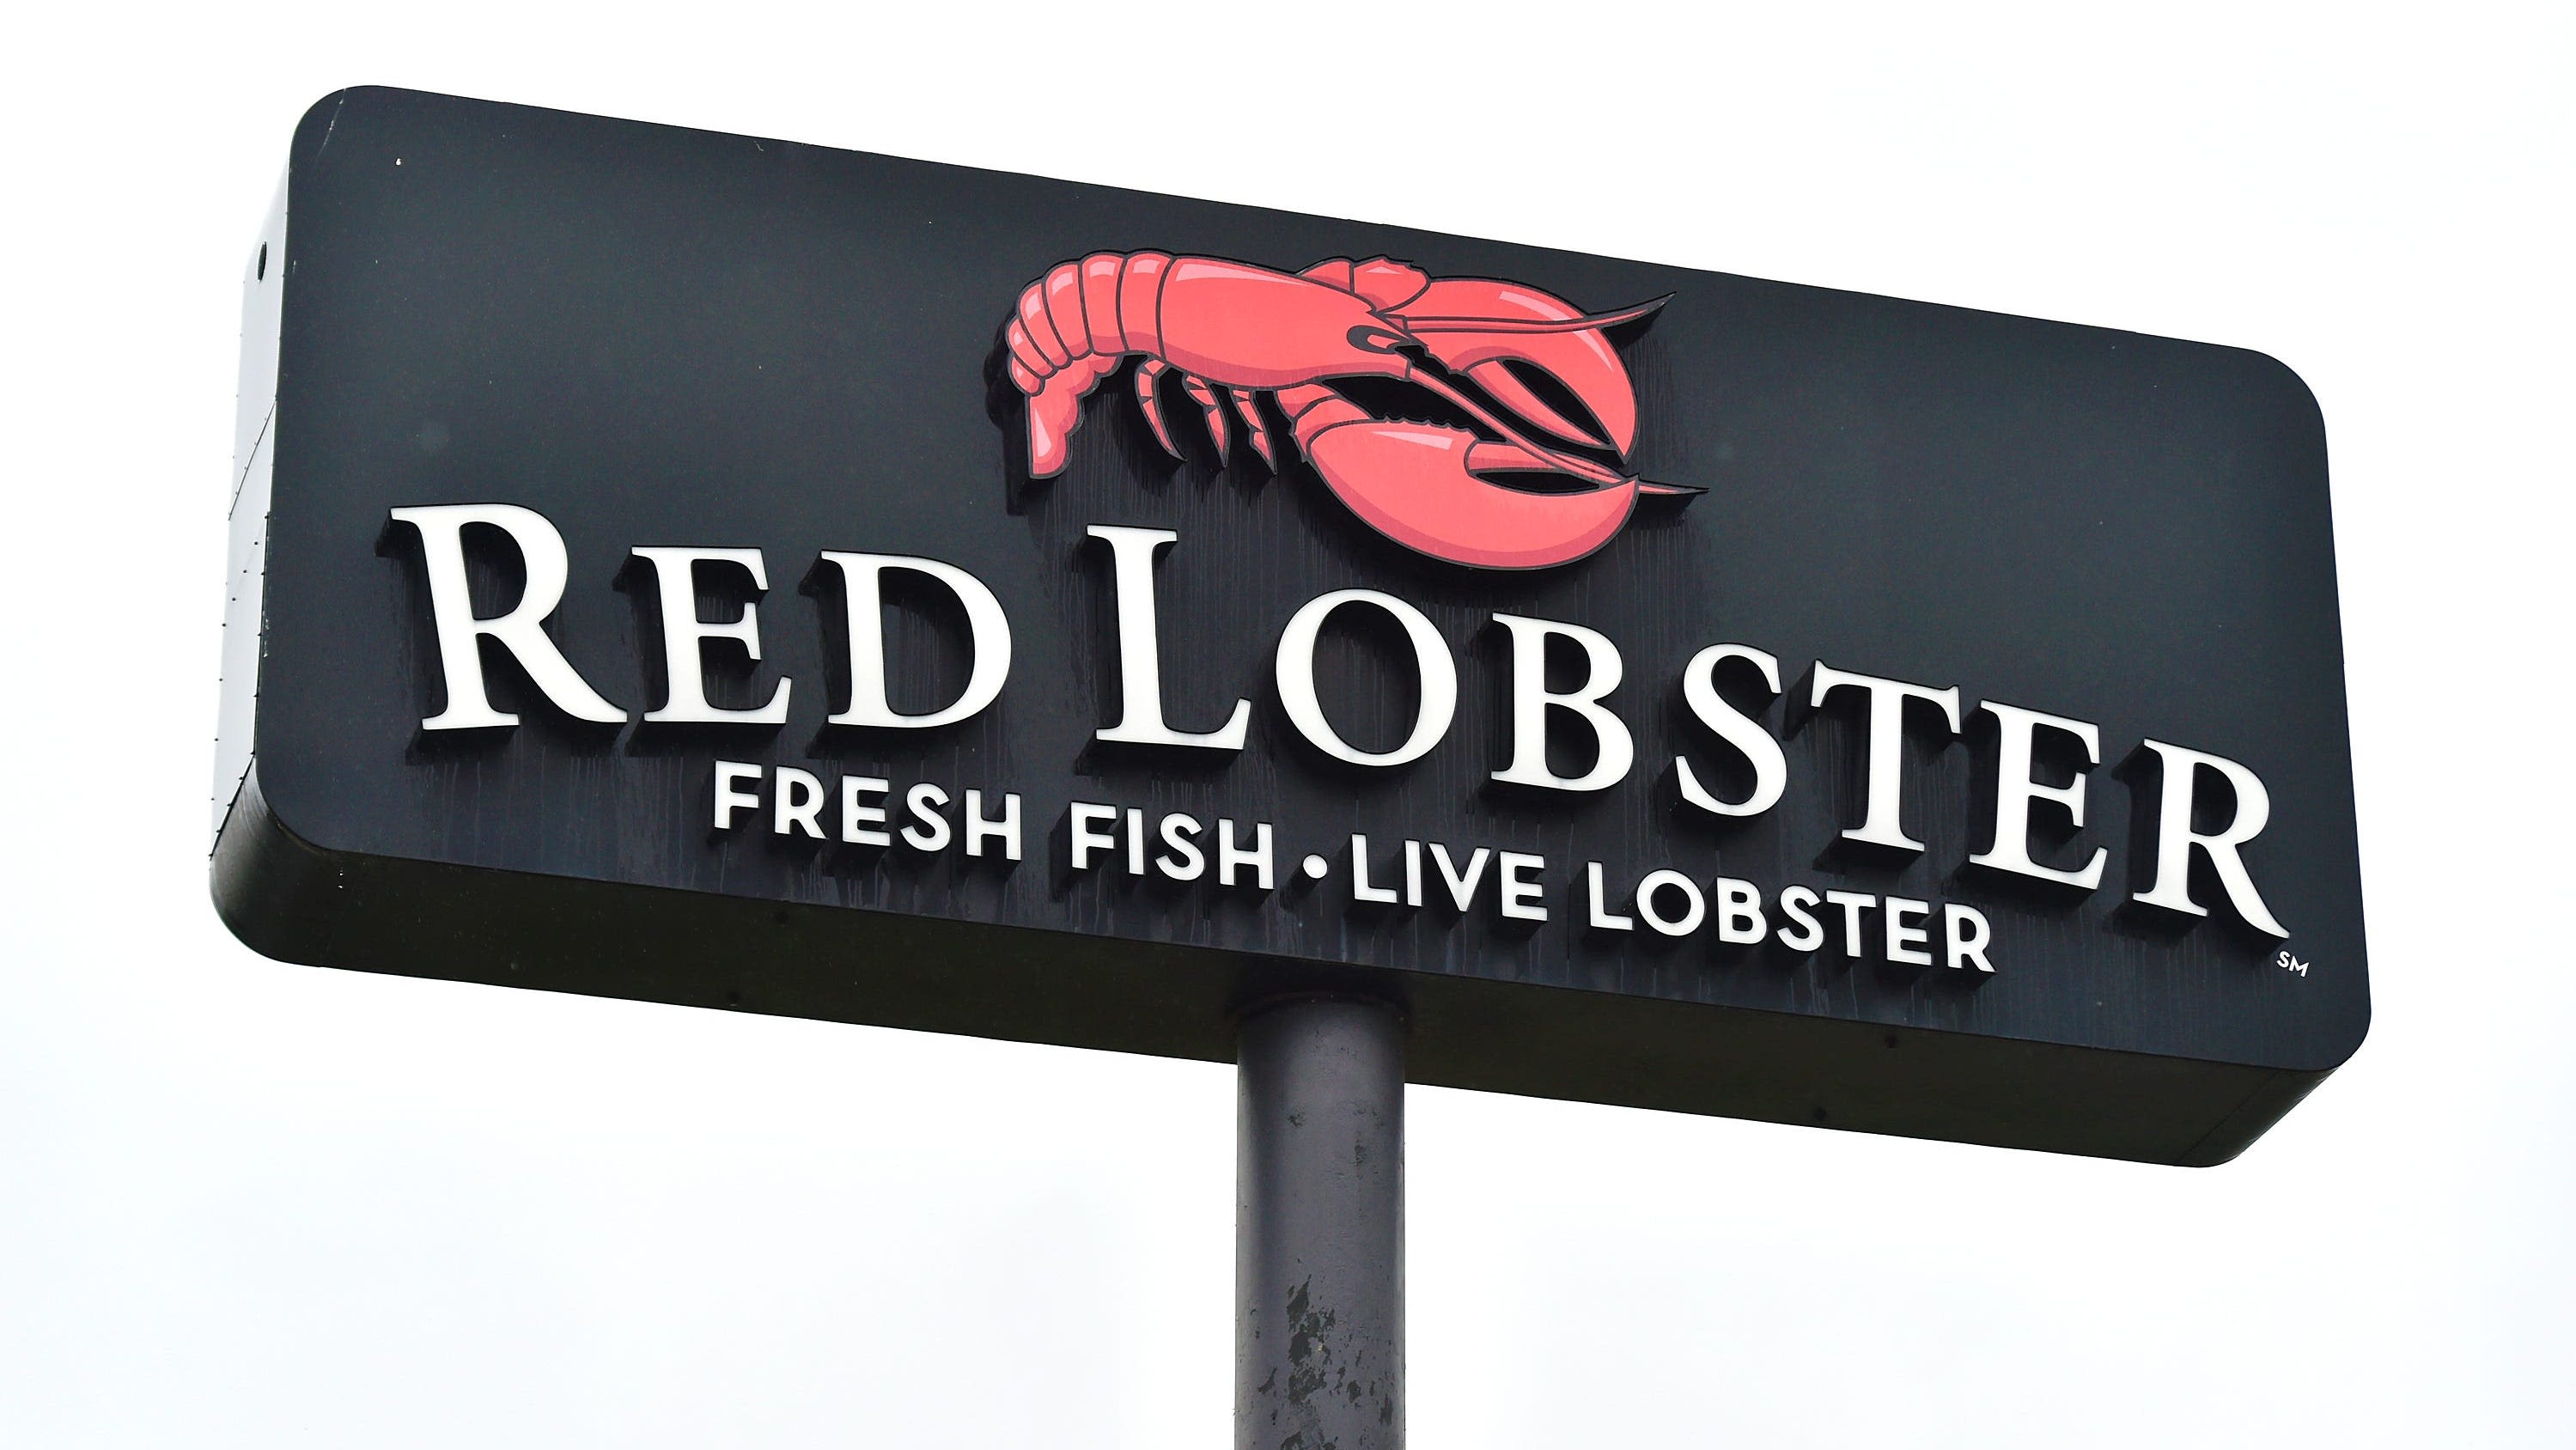 Red Lobster is closing dozens of locations, including at least 4 in Colorado. See where.